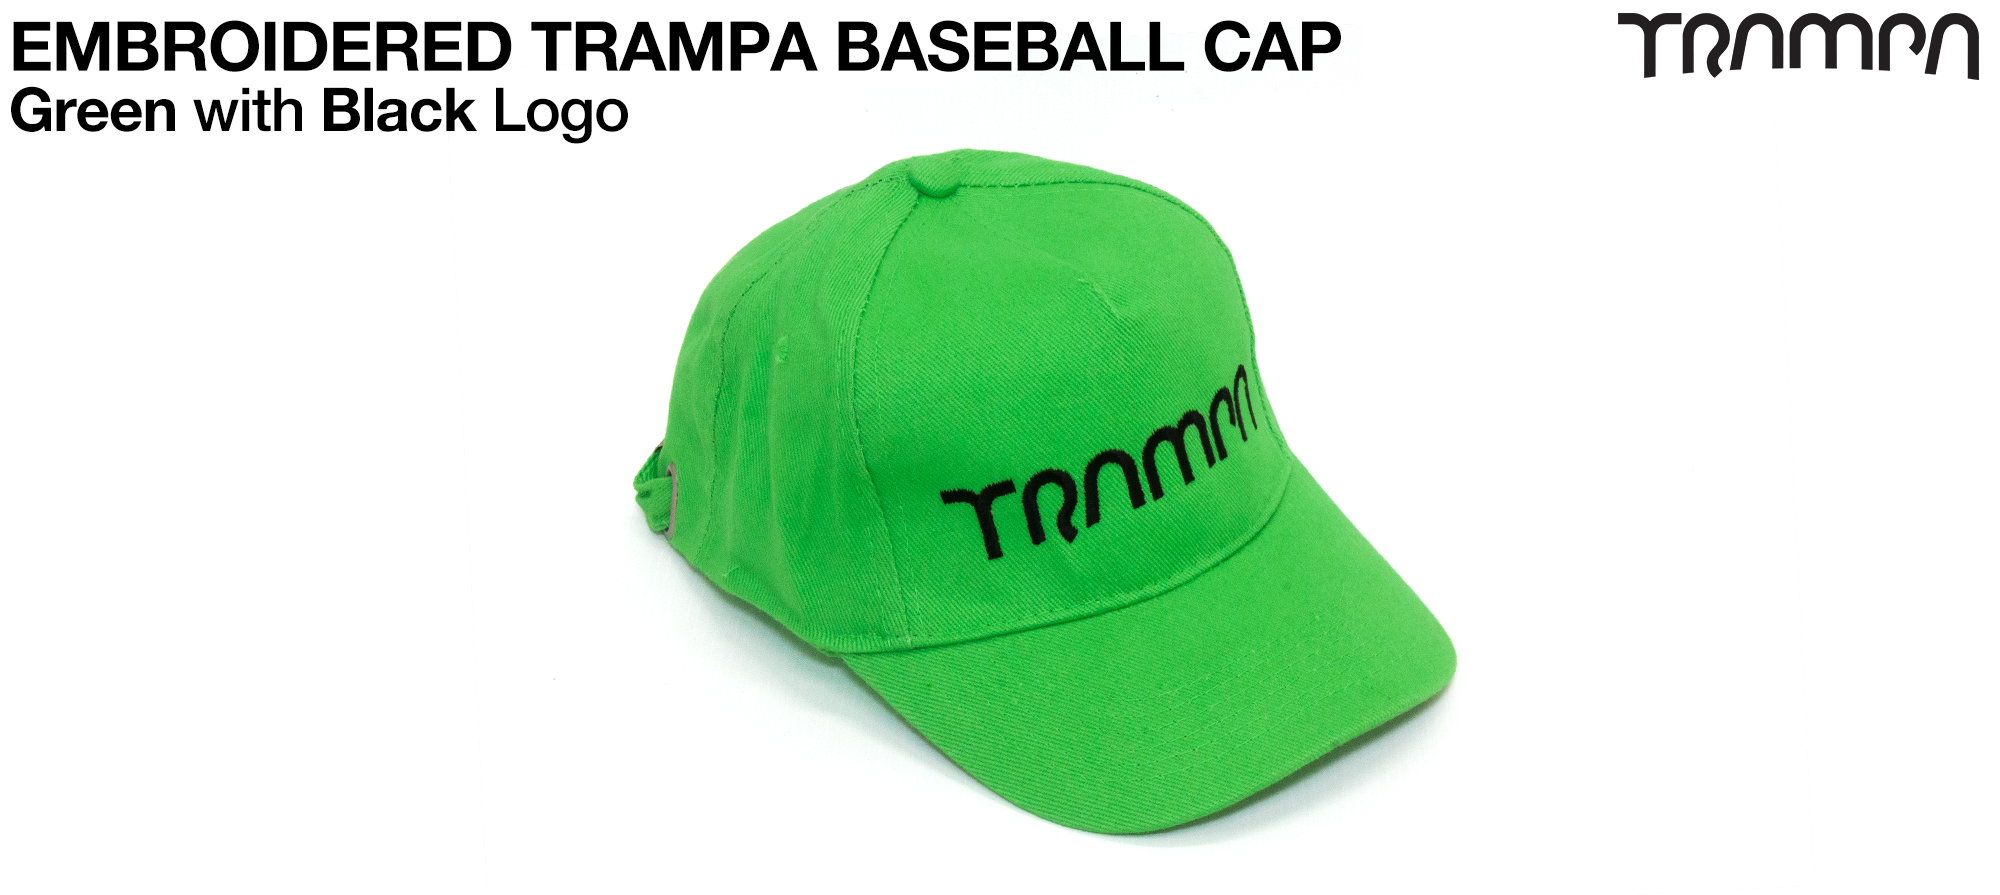 Lime GREEN 5 Panel Baseball Cap with BLACK logo embroidered